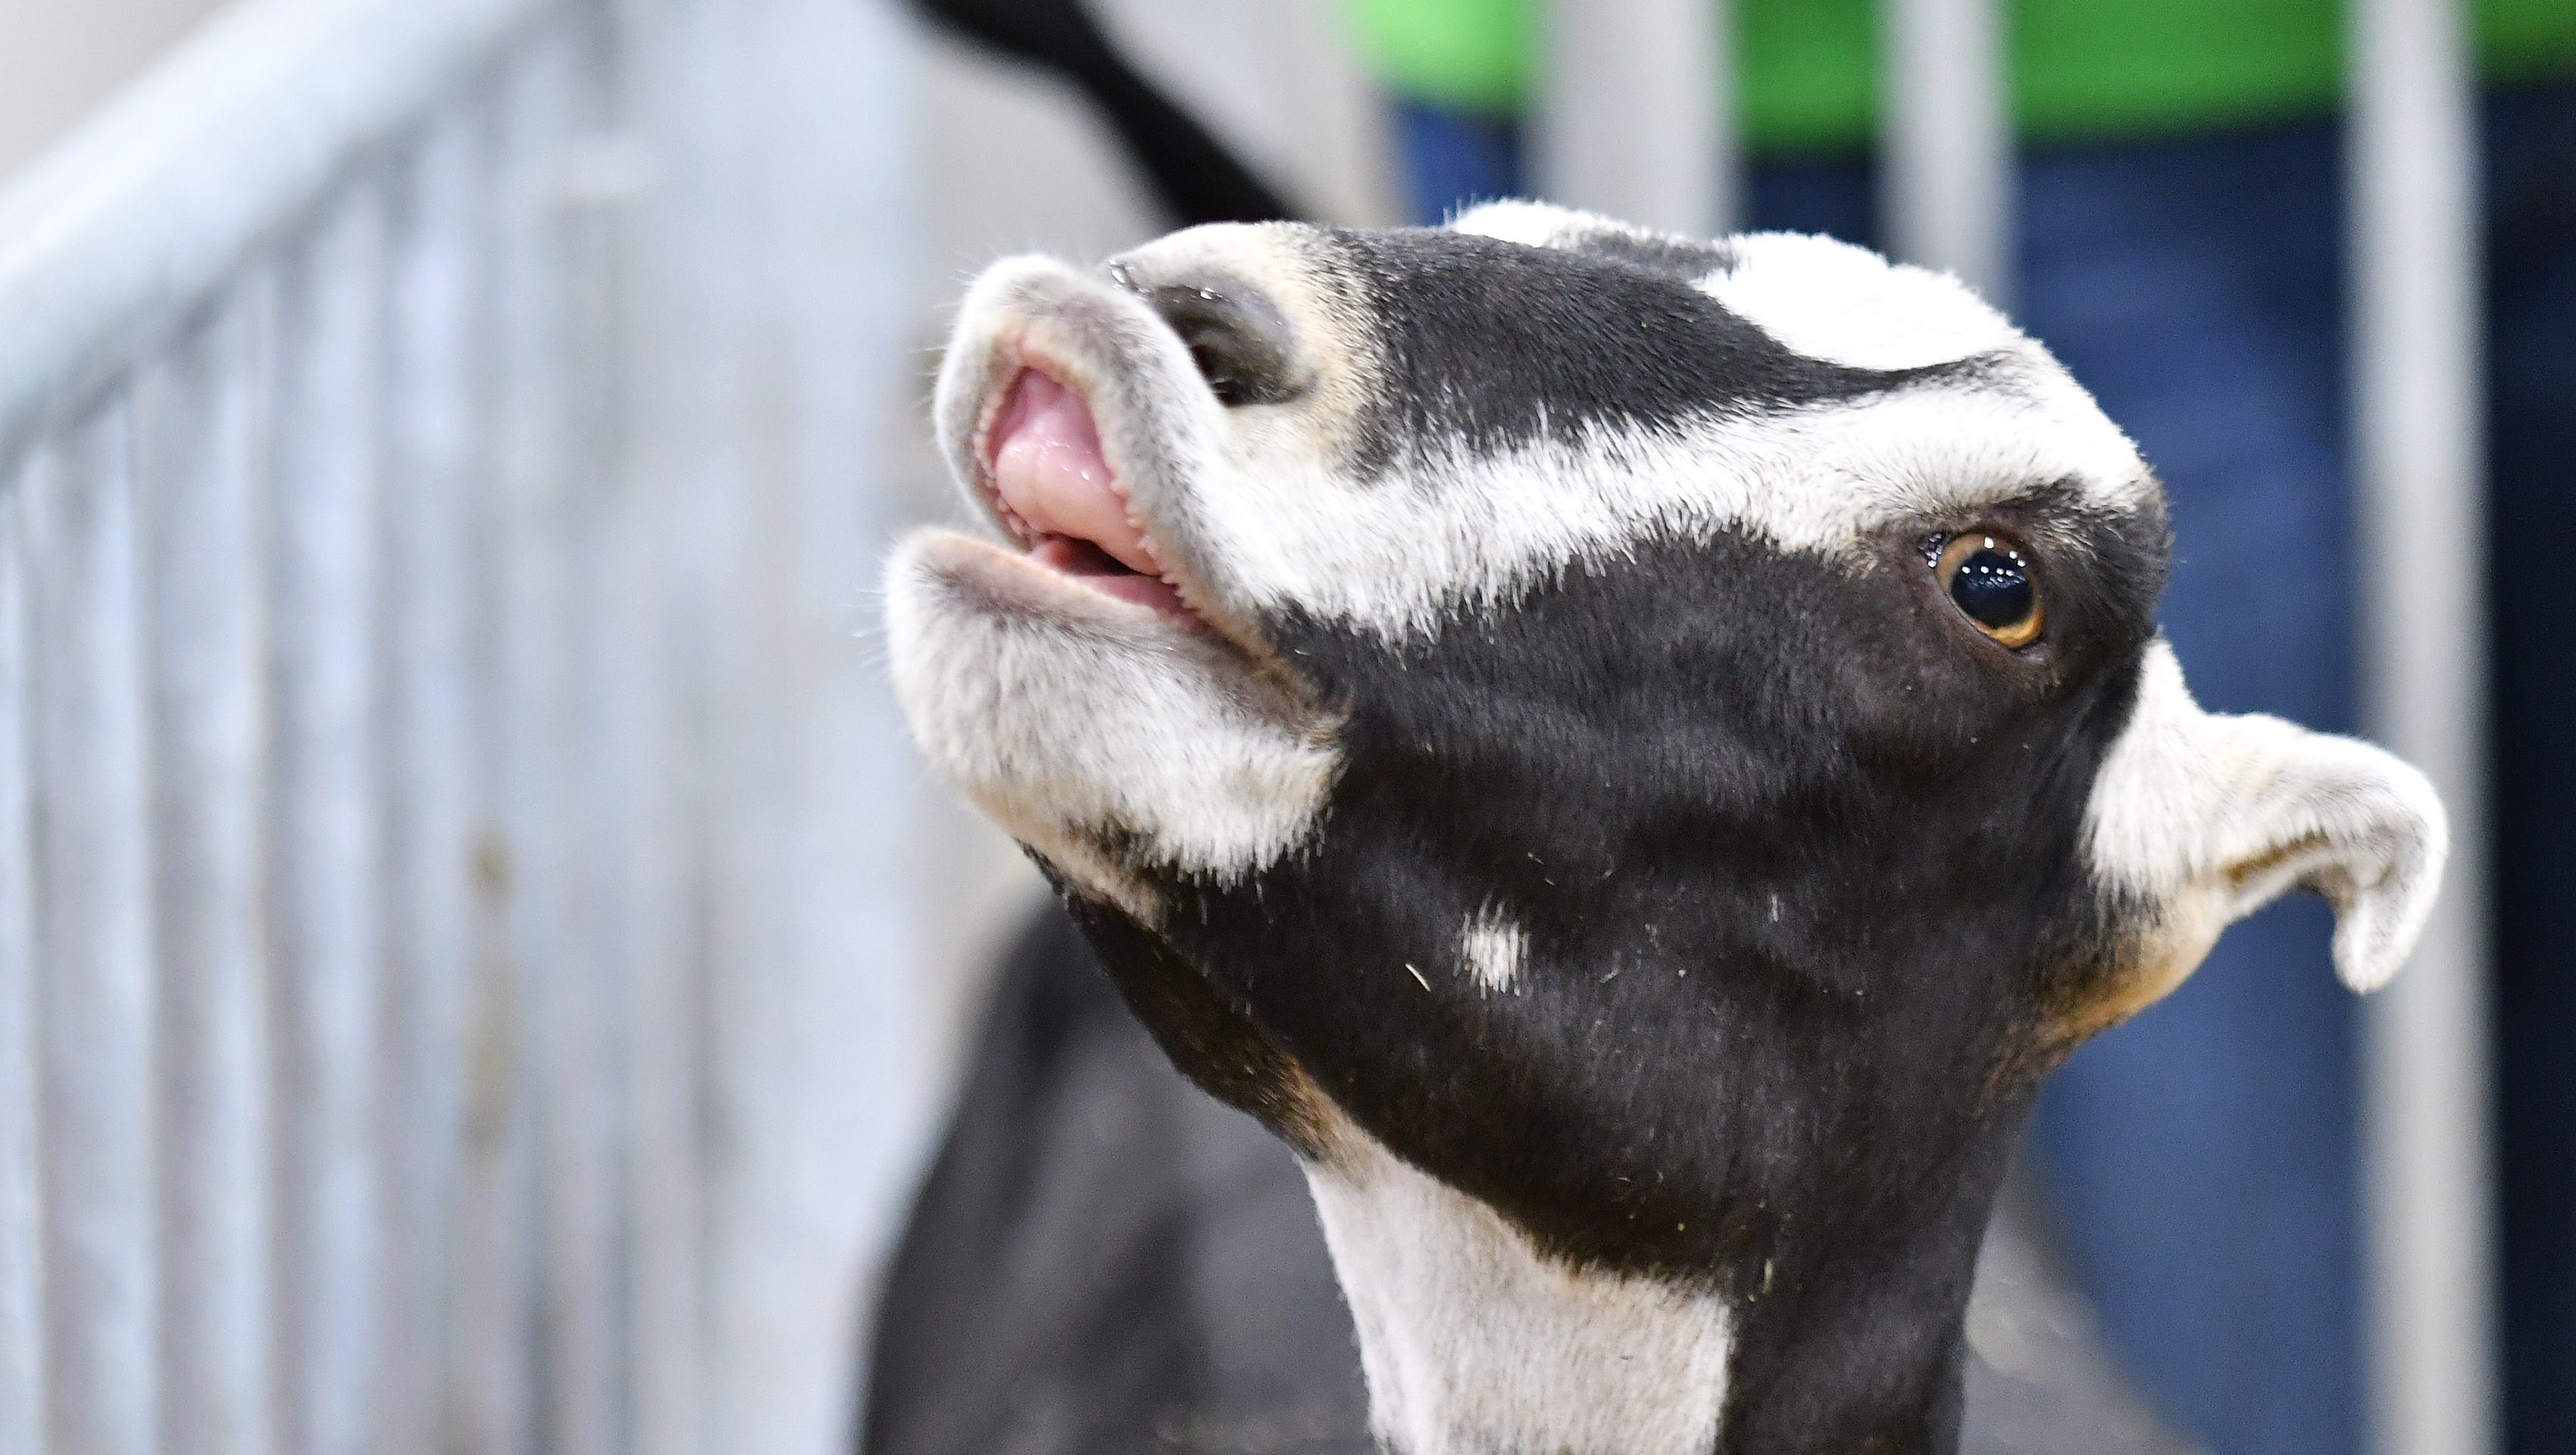 This is a LaMancha goat at the Udderly Nuts Dairy Goats display. LaMancha is the only American breed of goat and they were bred for small ears.